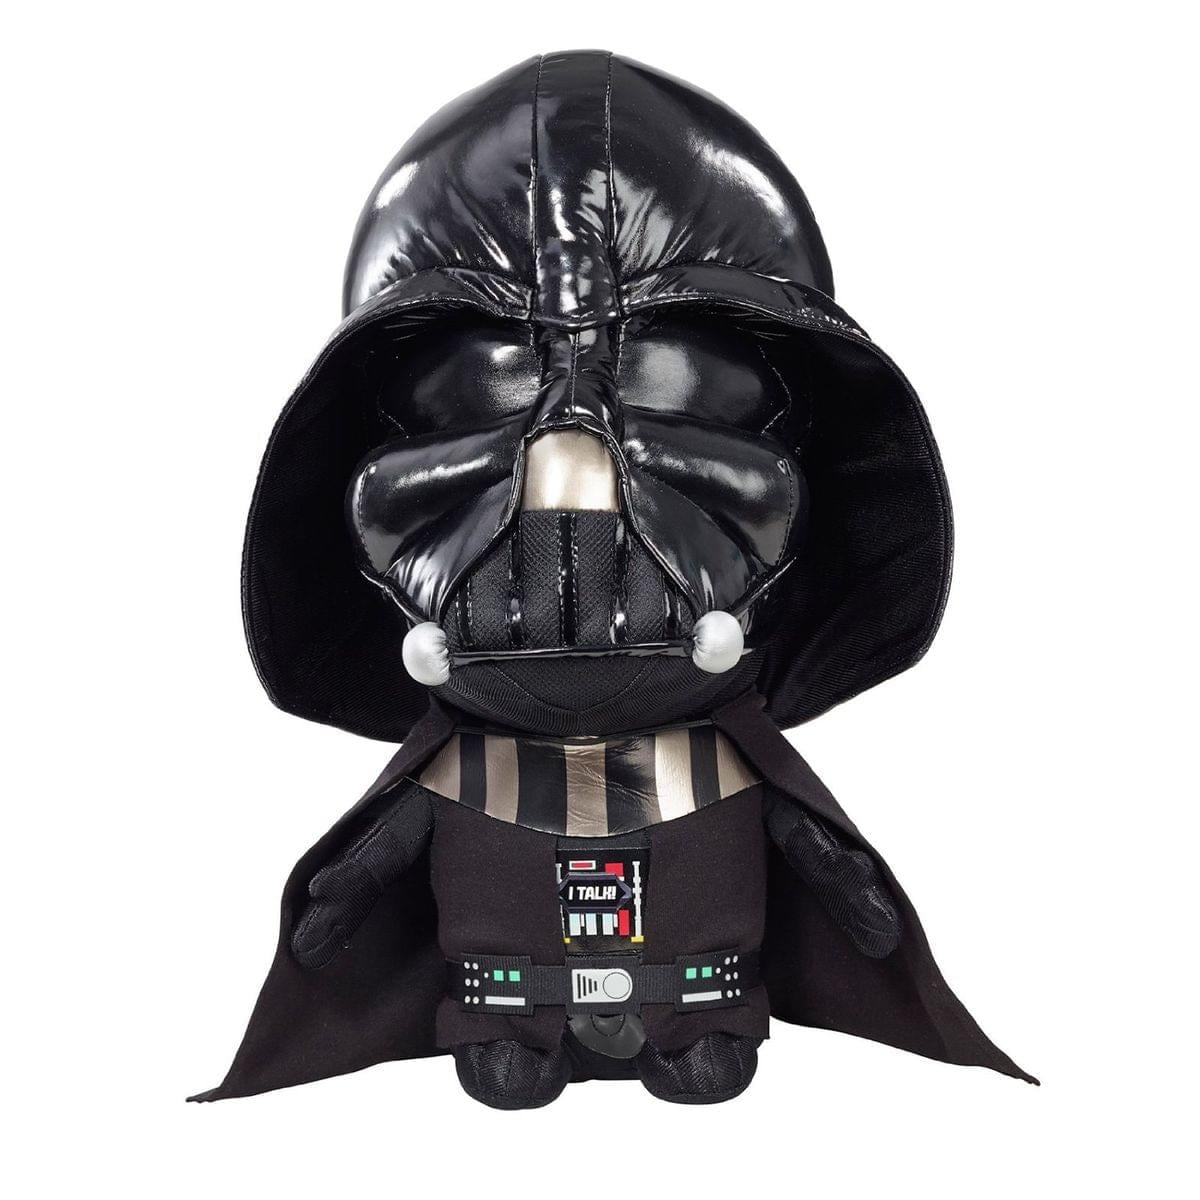 Star Wars Disney 15 Inch Plush Pillow Darth Vader 2day Delivery for sale online 